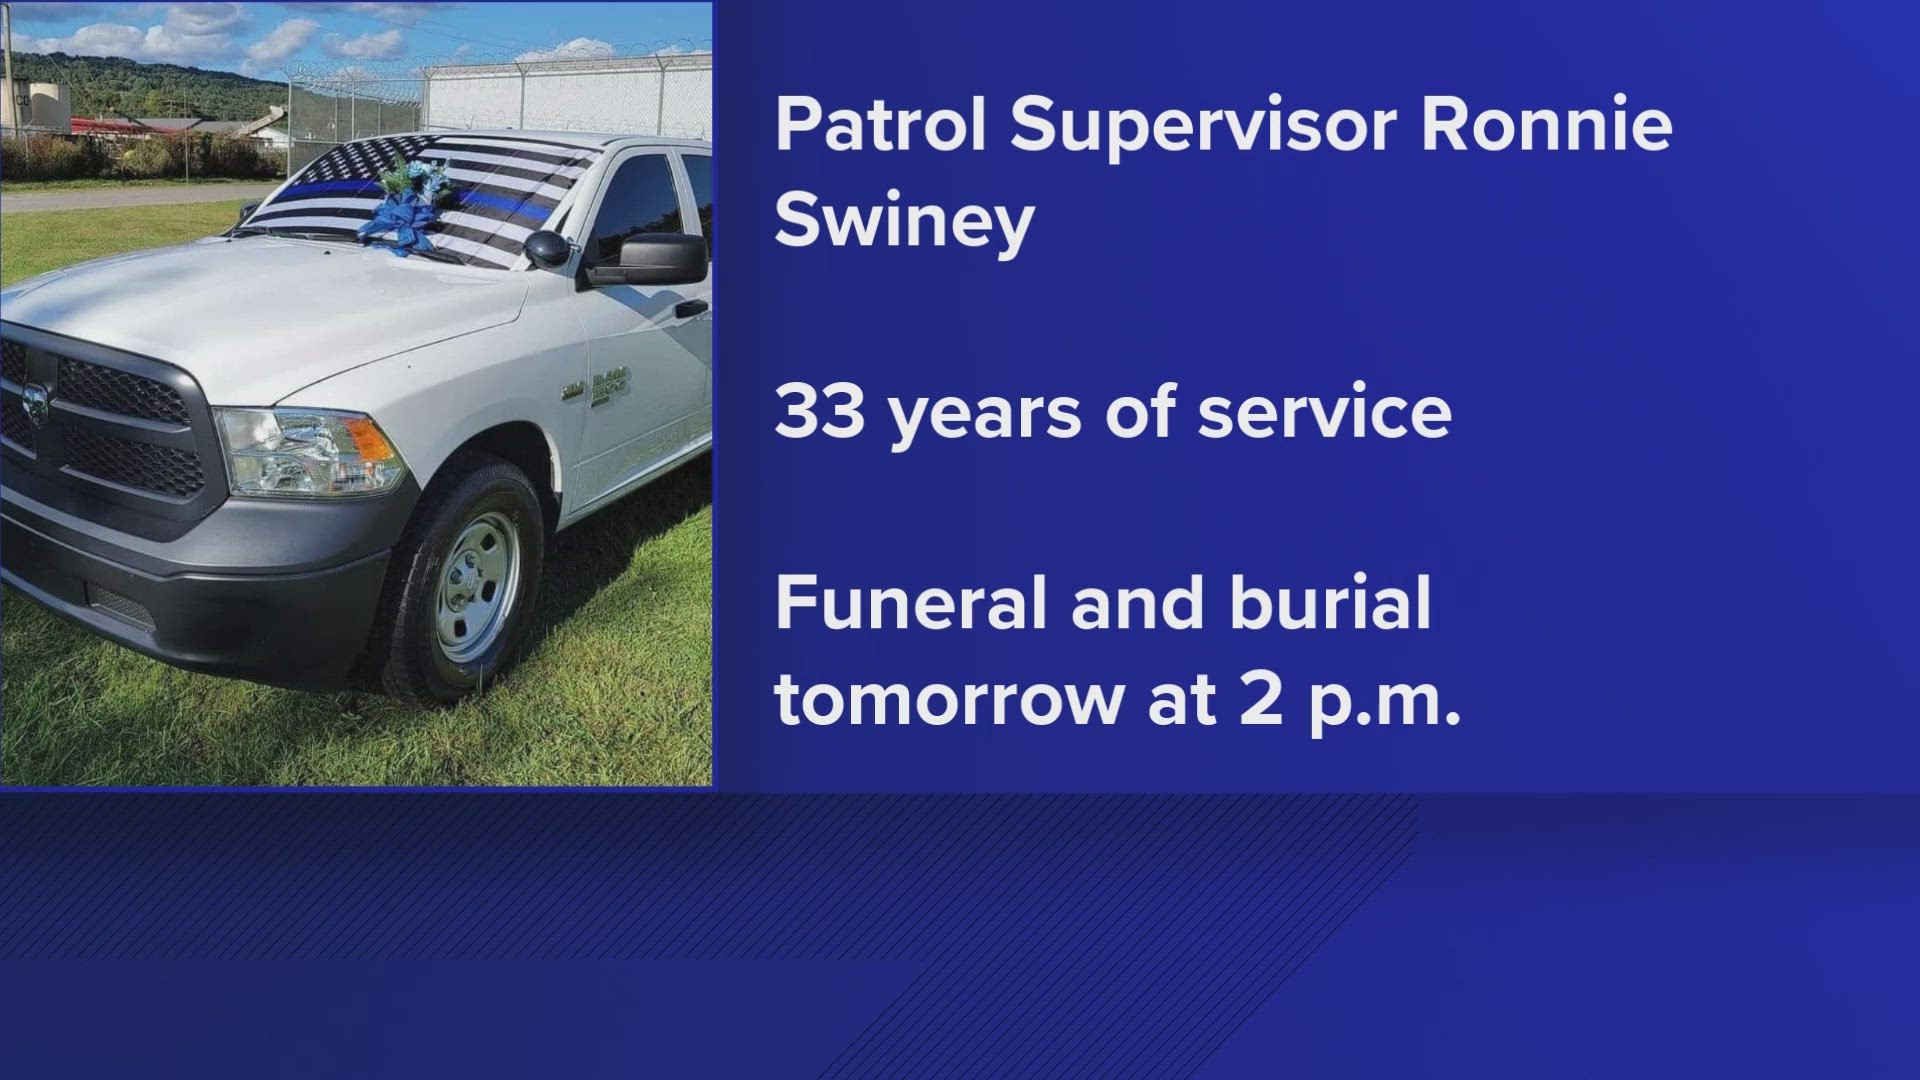 Funeral services for Patrol Supervisor Ronnie Joe Swiney are scheduled for Wednesday at 2 p.m.